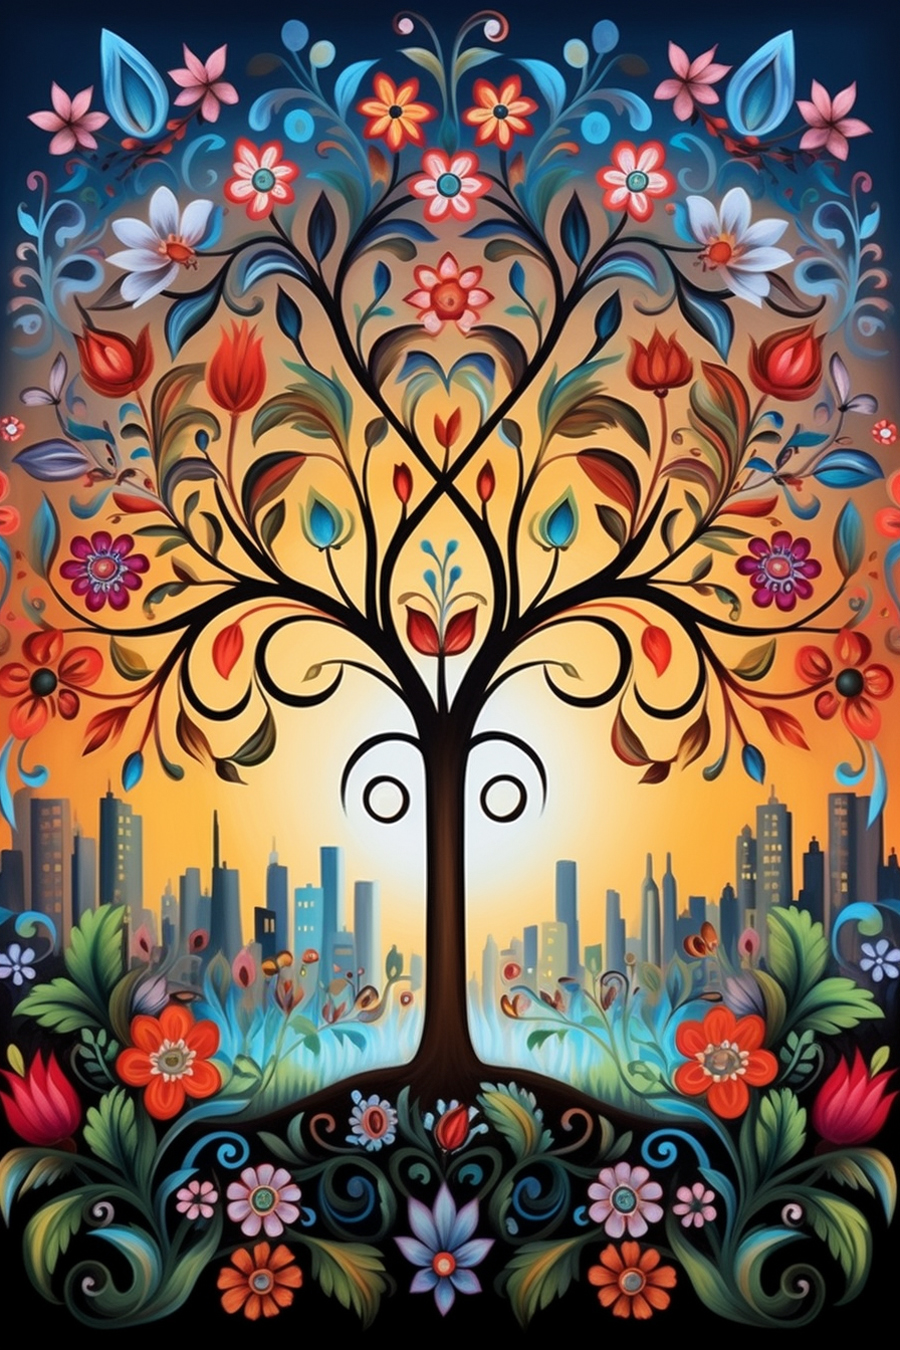 A painting of a tree with flowers and plants in front of a city.